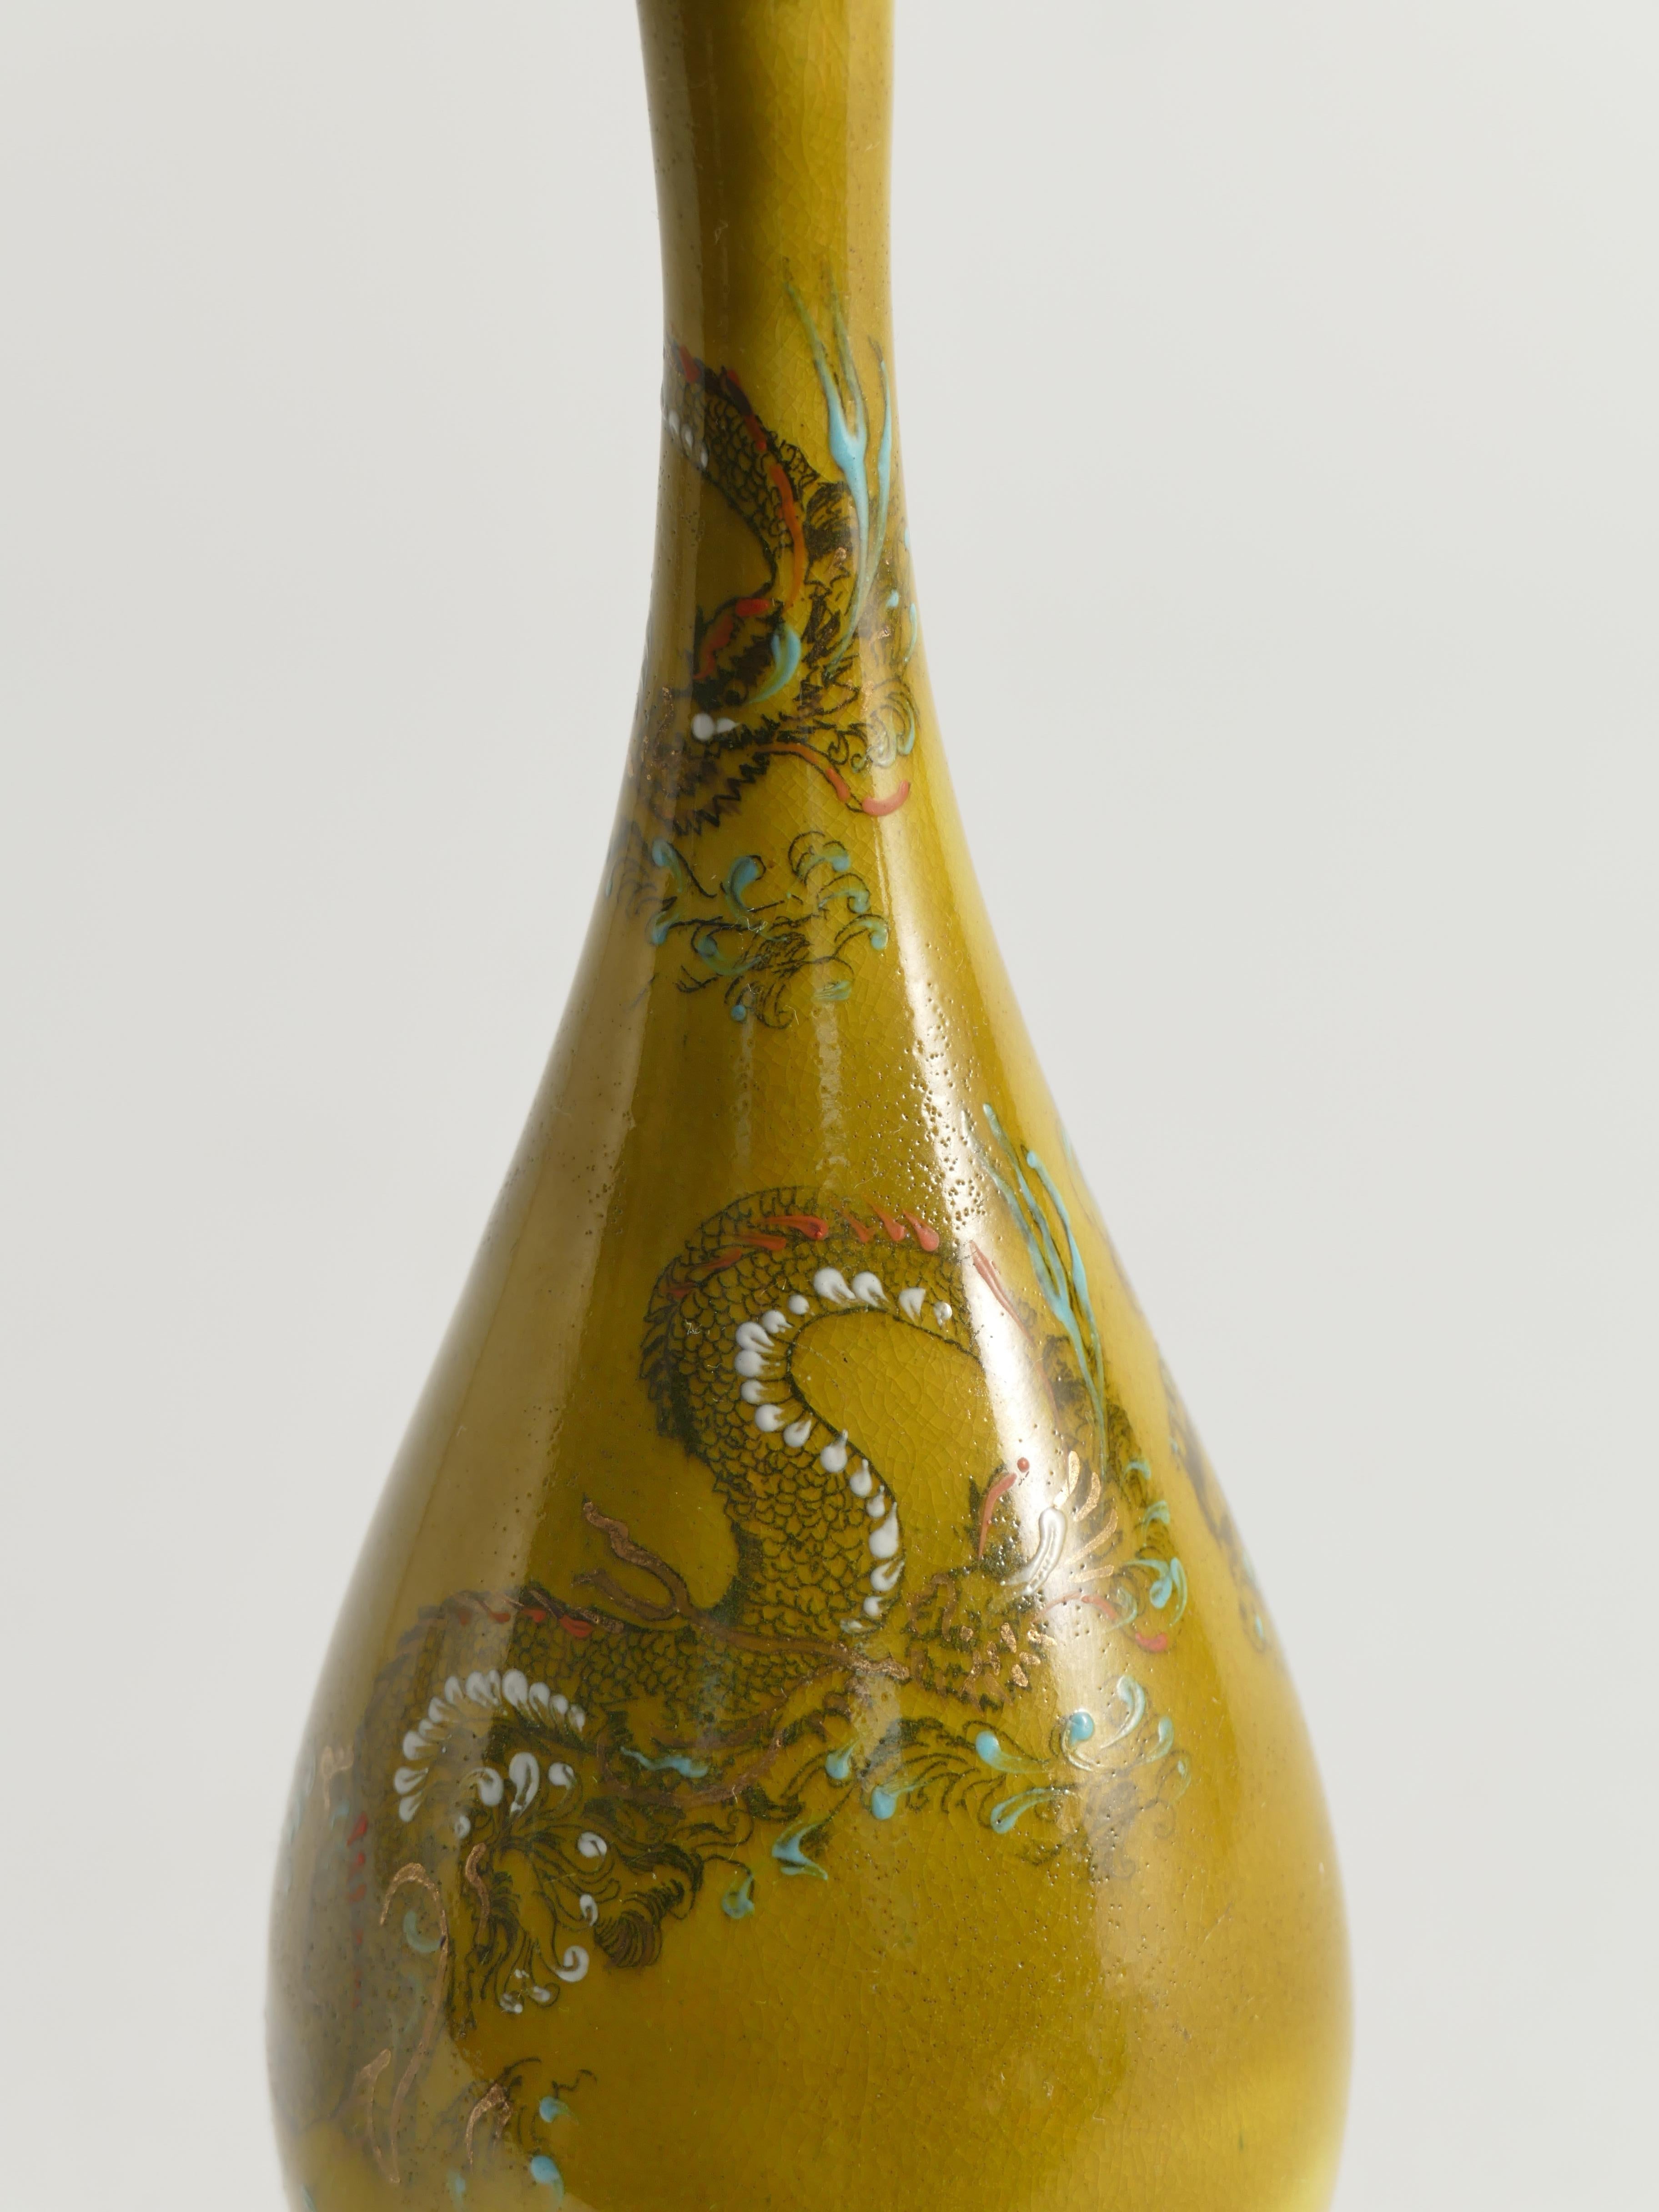 Chinoiserie Ochre Yellow Dragon Vase by Lambeth Doulton Faience, England 1880s In Good Condition For Sale In Grythyttan, SE